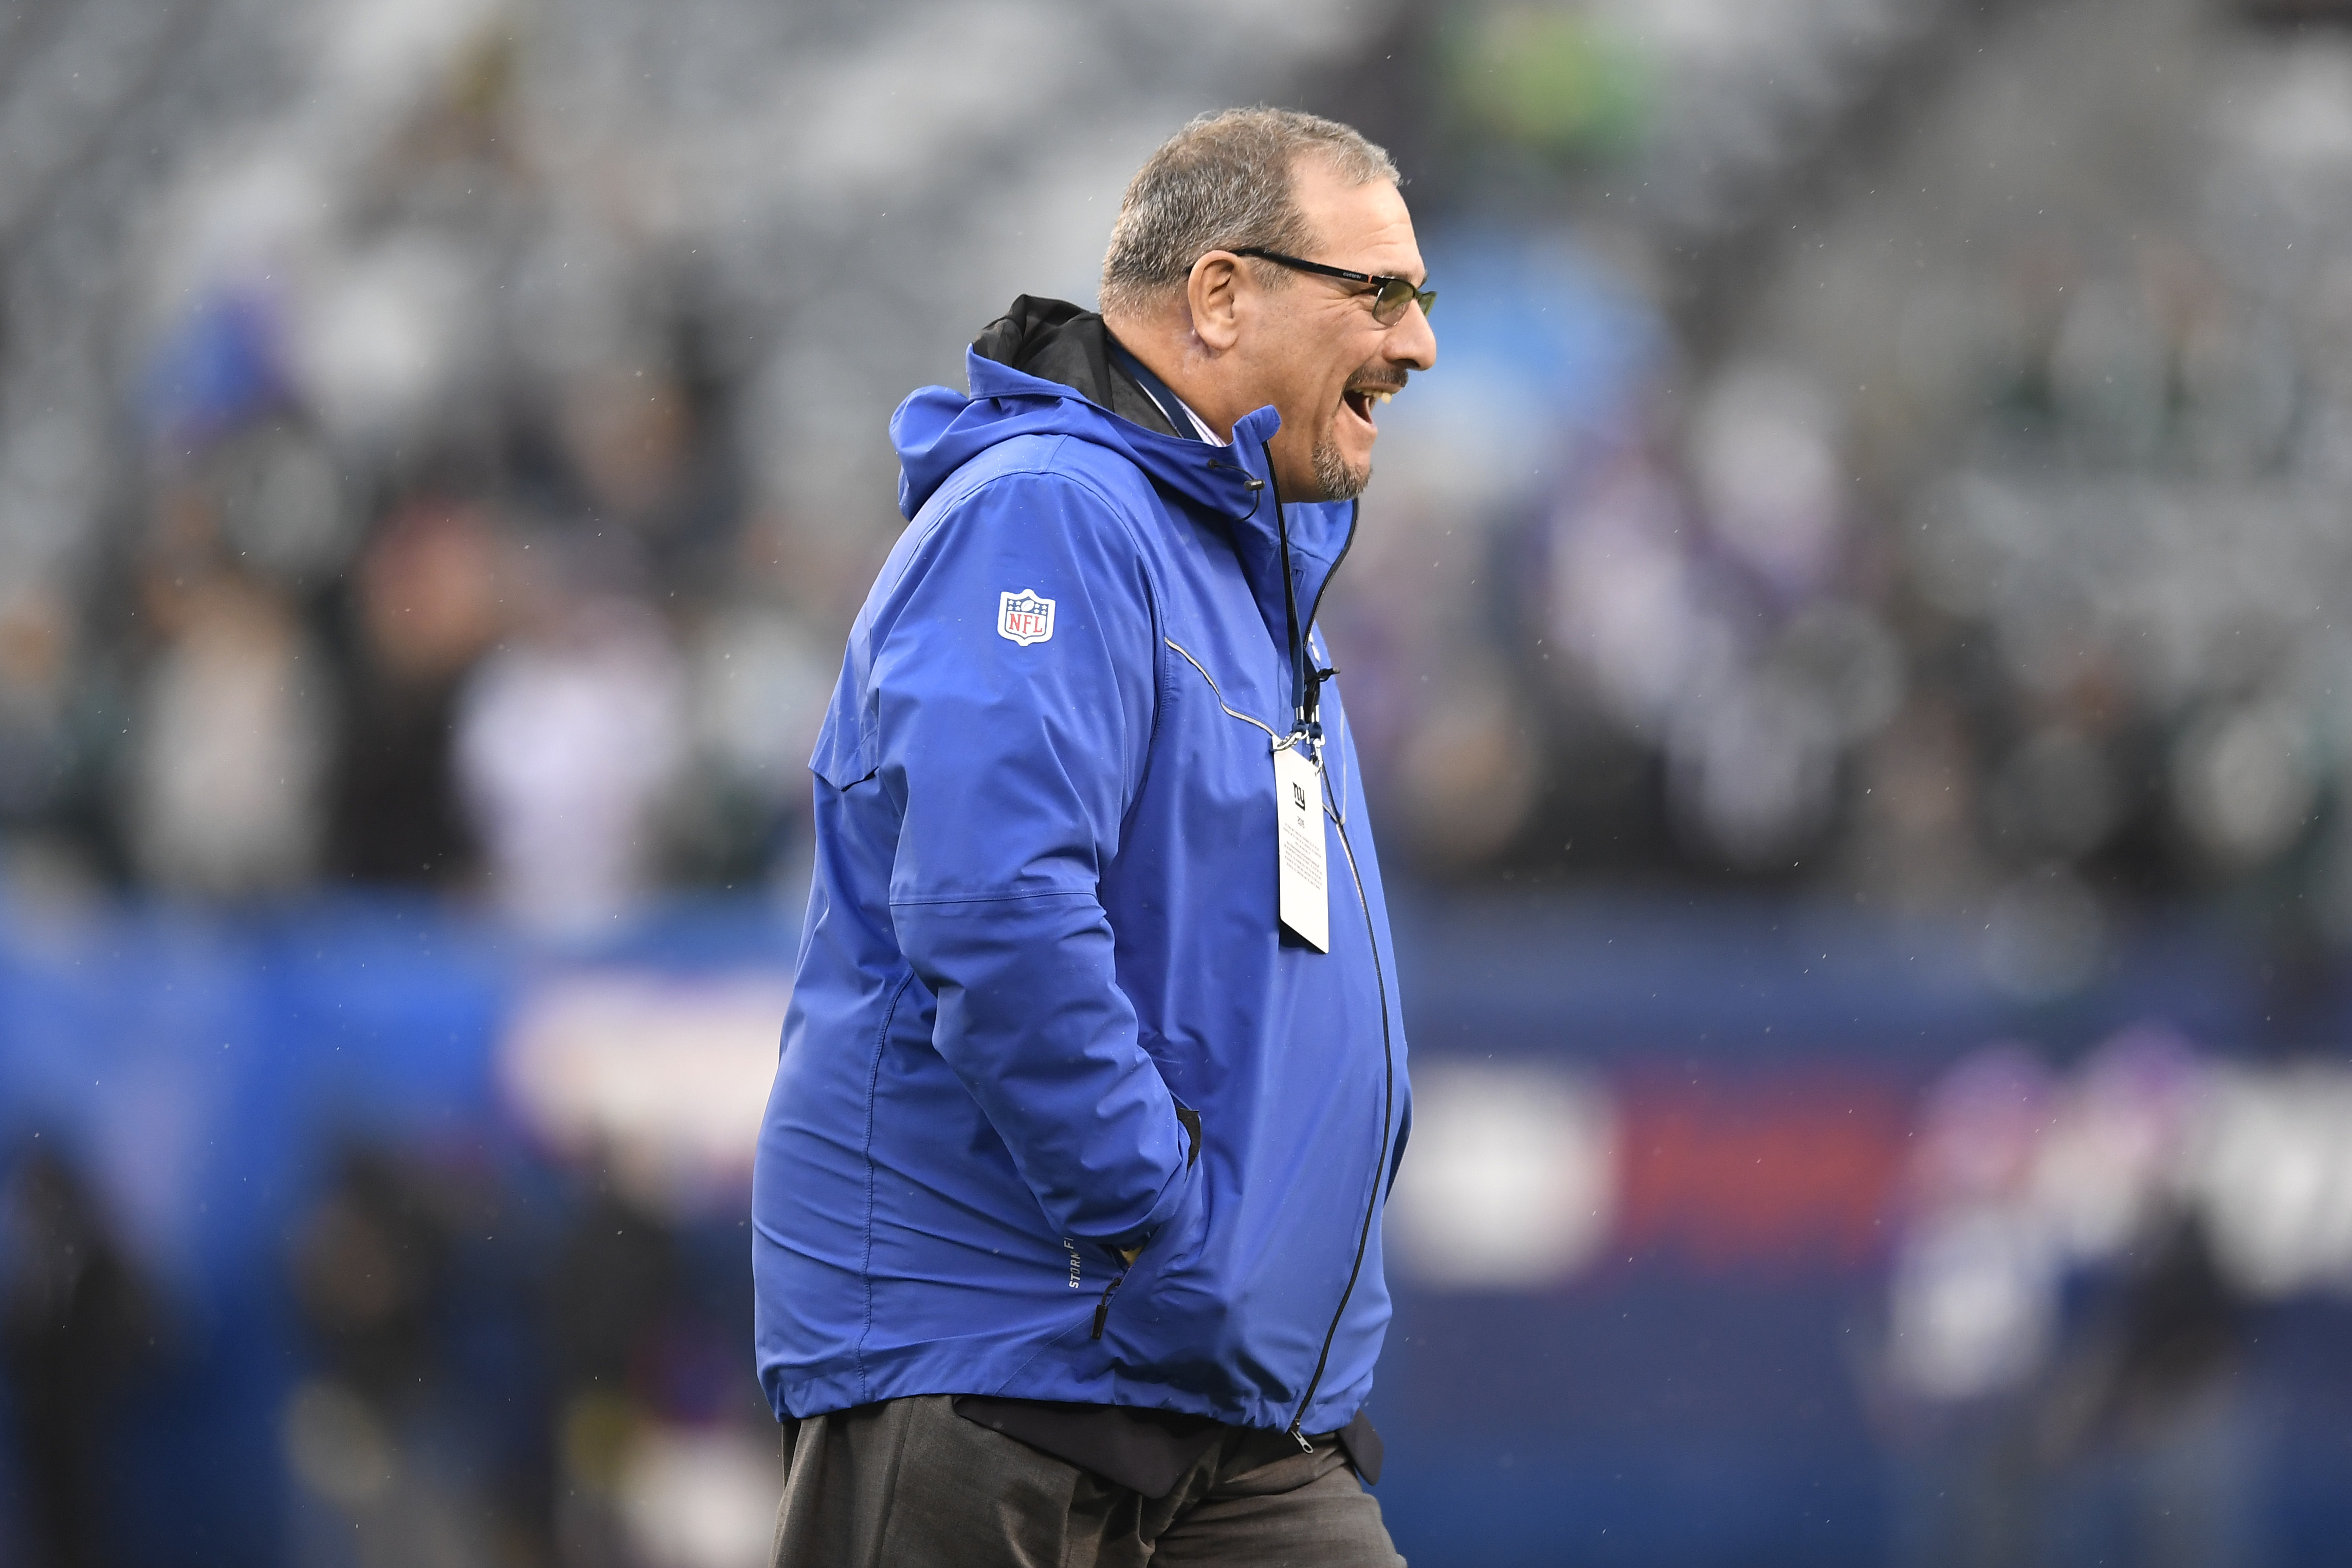 New York Giants general manager Dave Gettleman walks around before a game in 2019